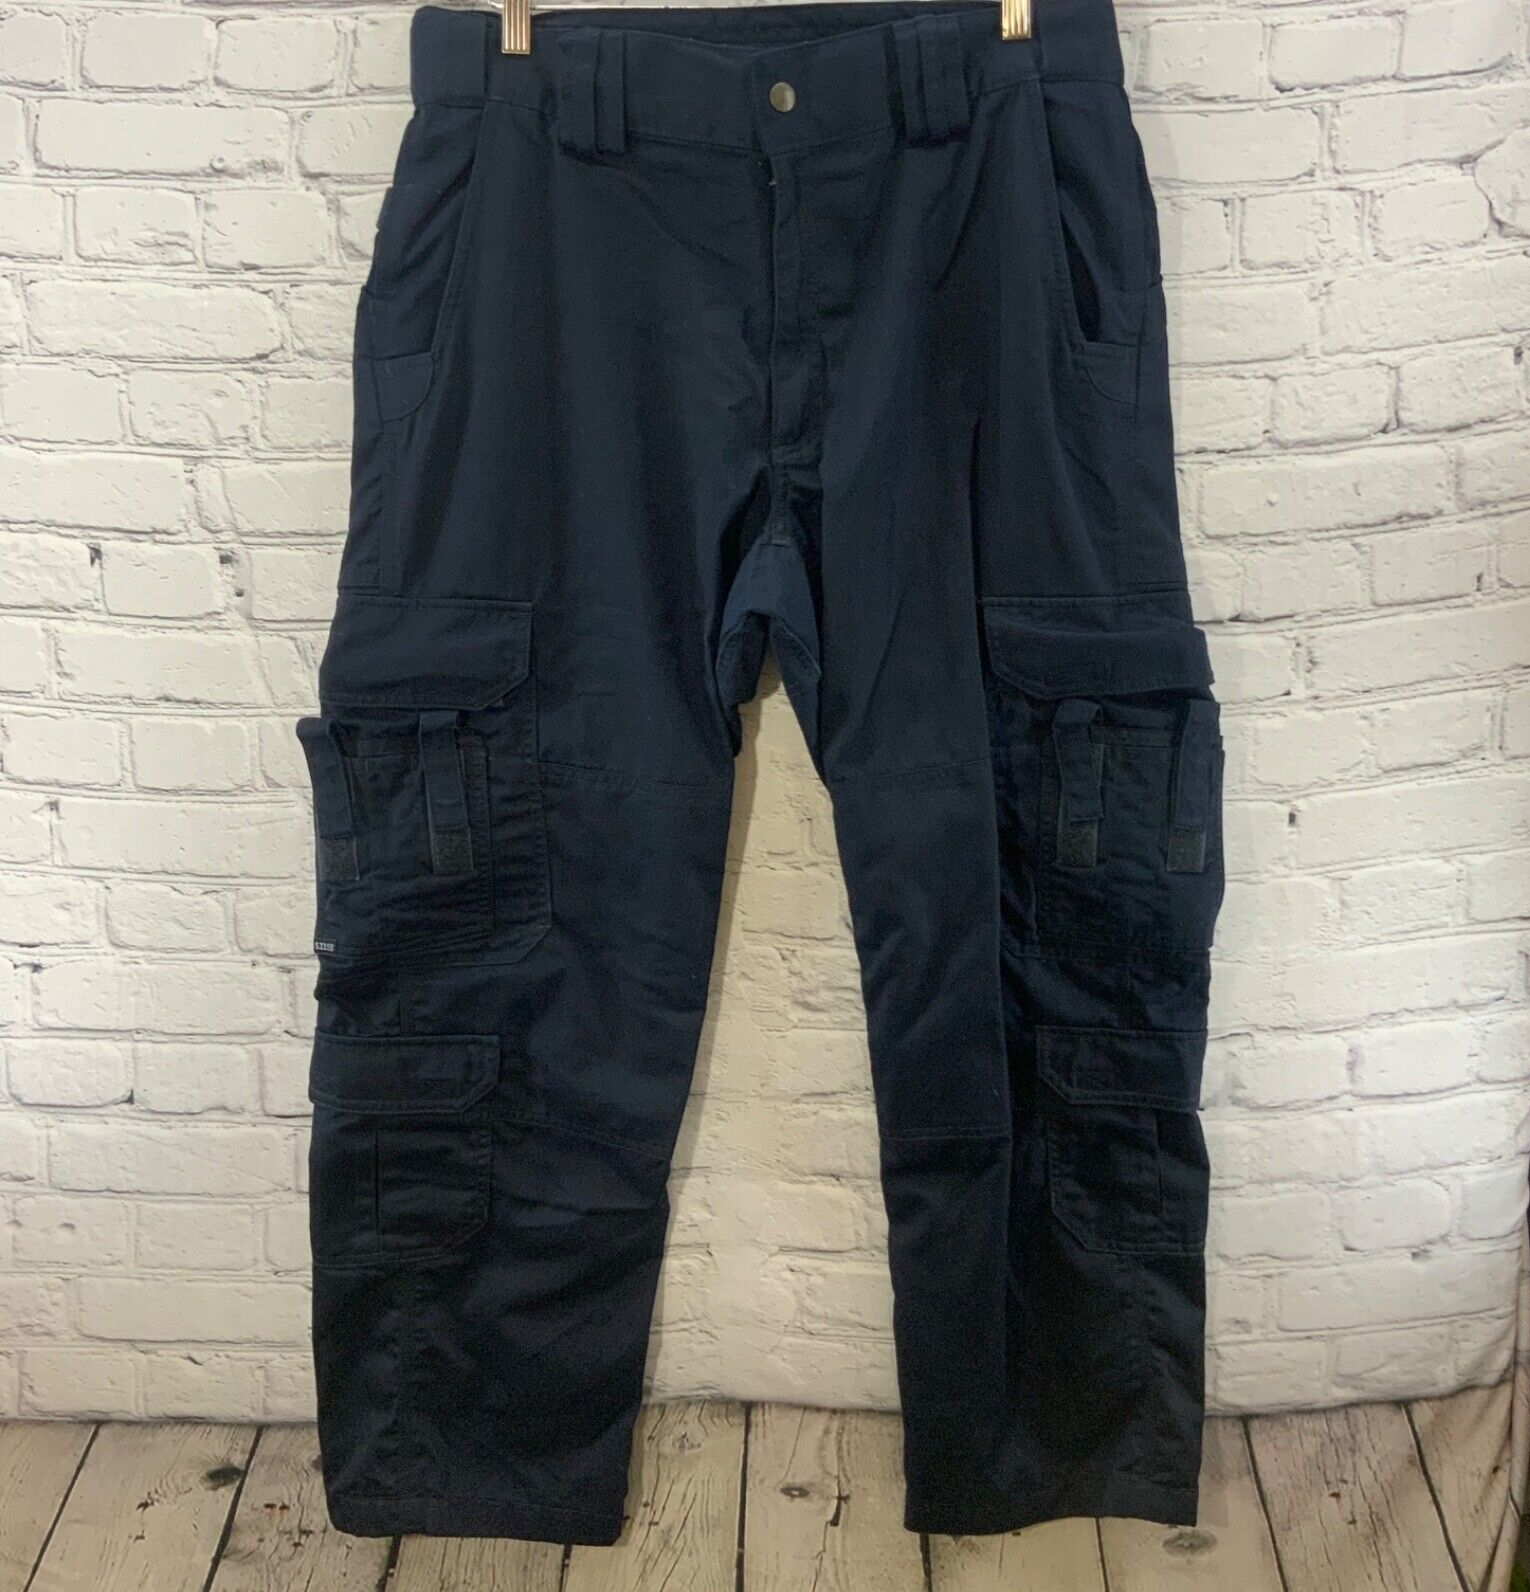 Primary image for 5.11 Tactical Series Pants Mens Sz 36/30 Blue Utility Cargo Work Pants